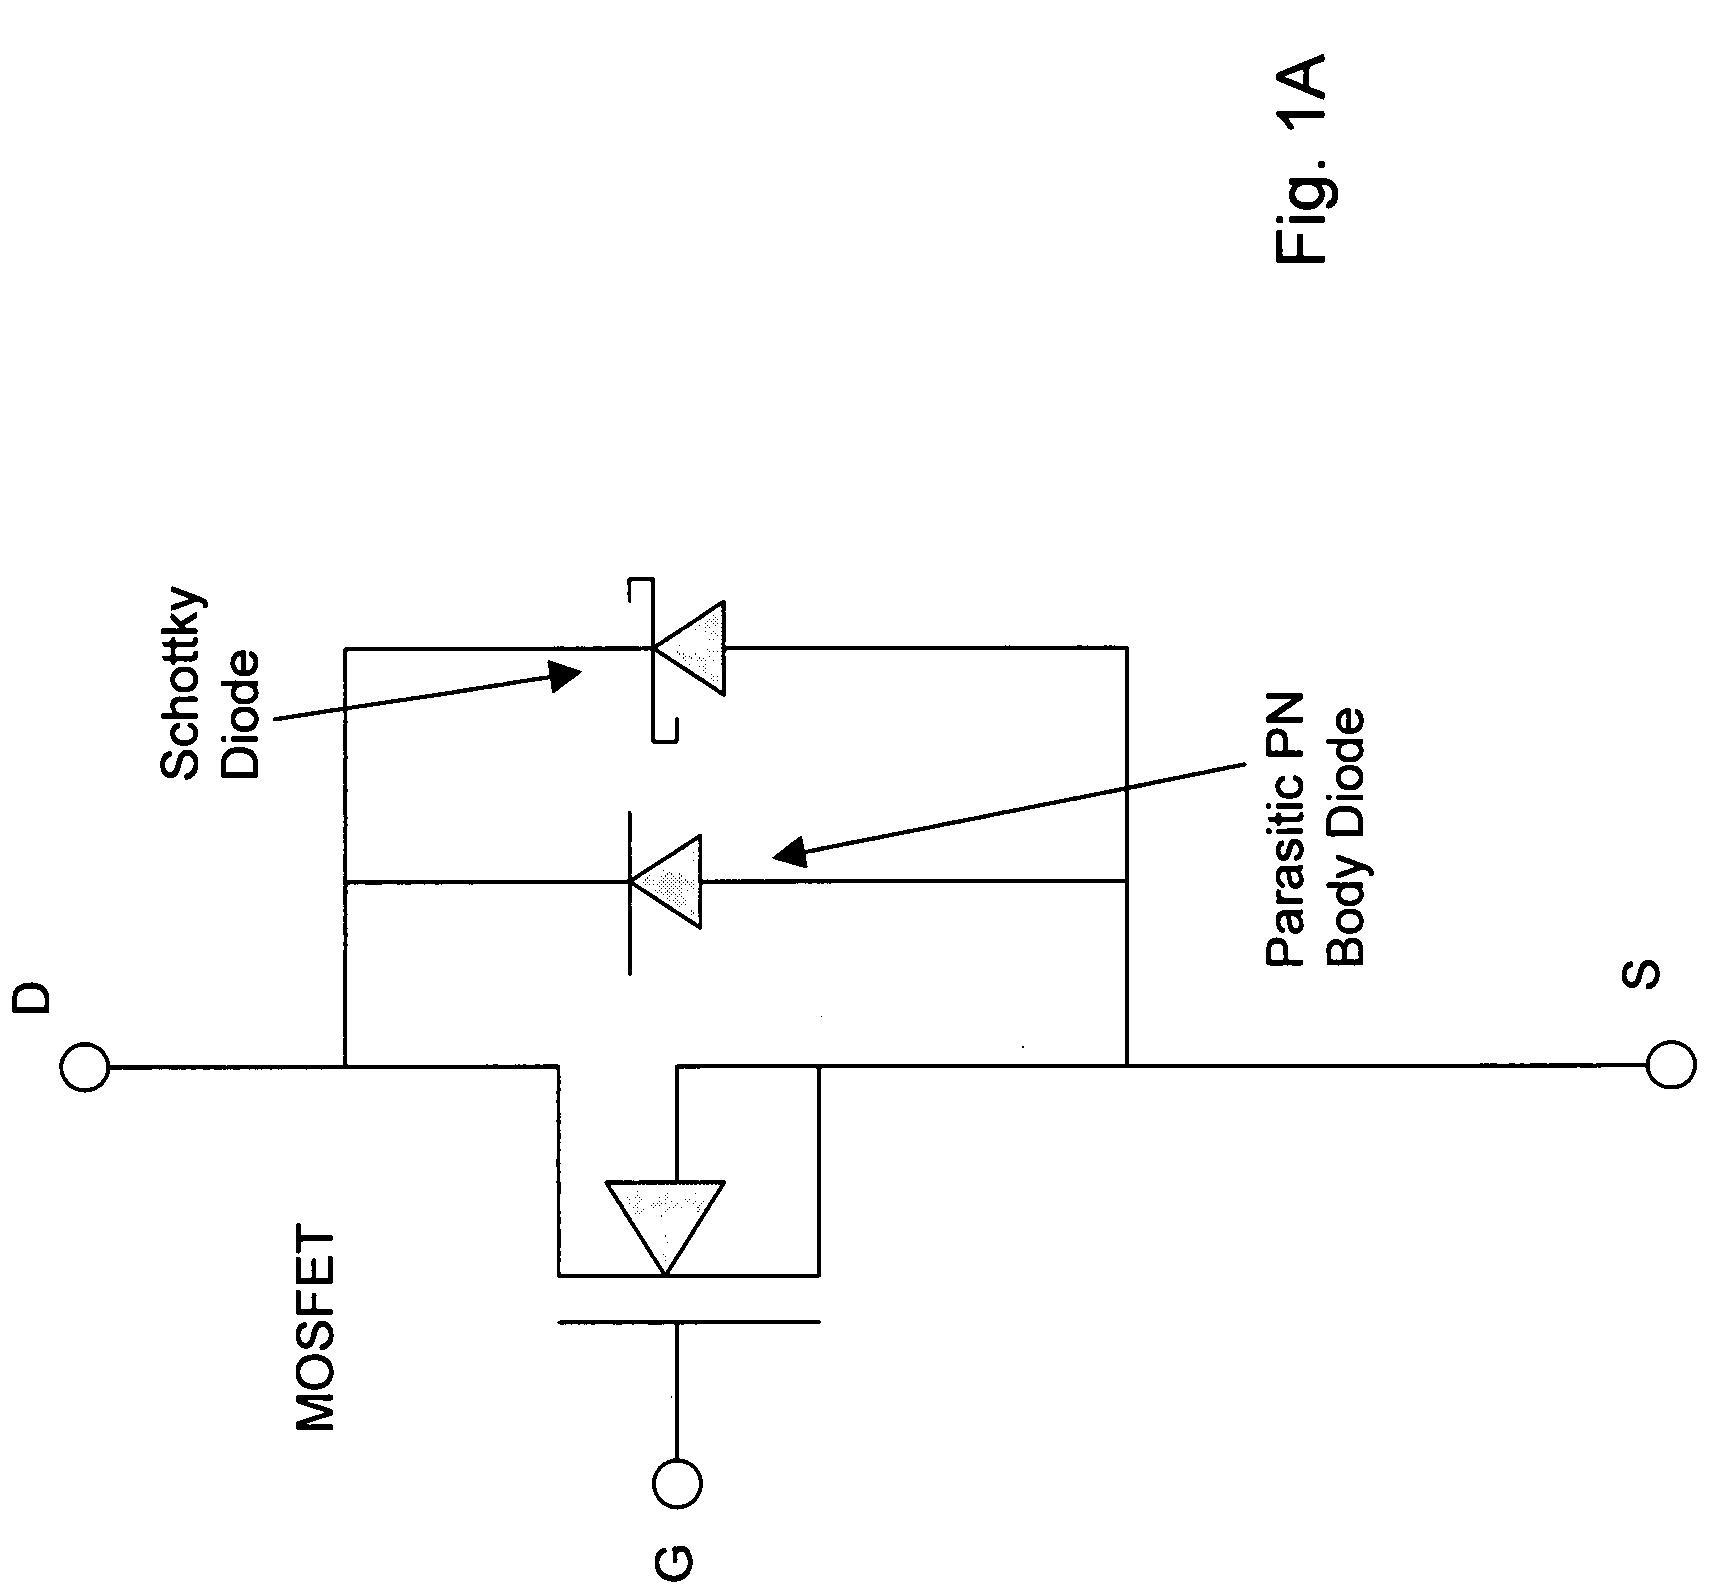 Trenched mosfets with embedded schottky in the same cell